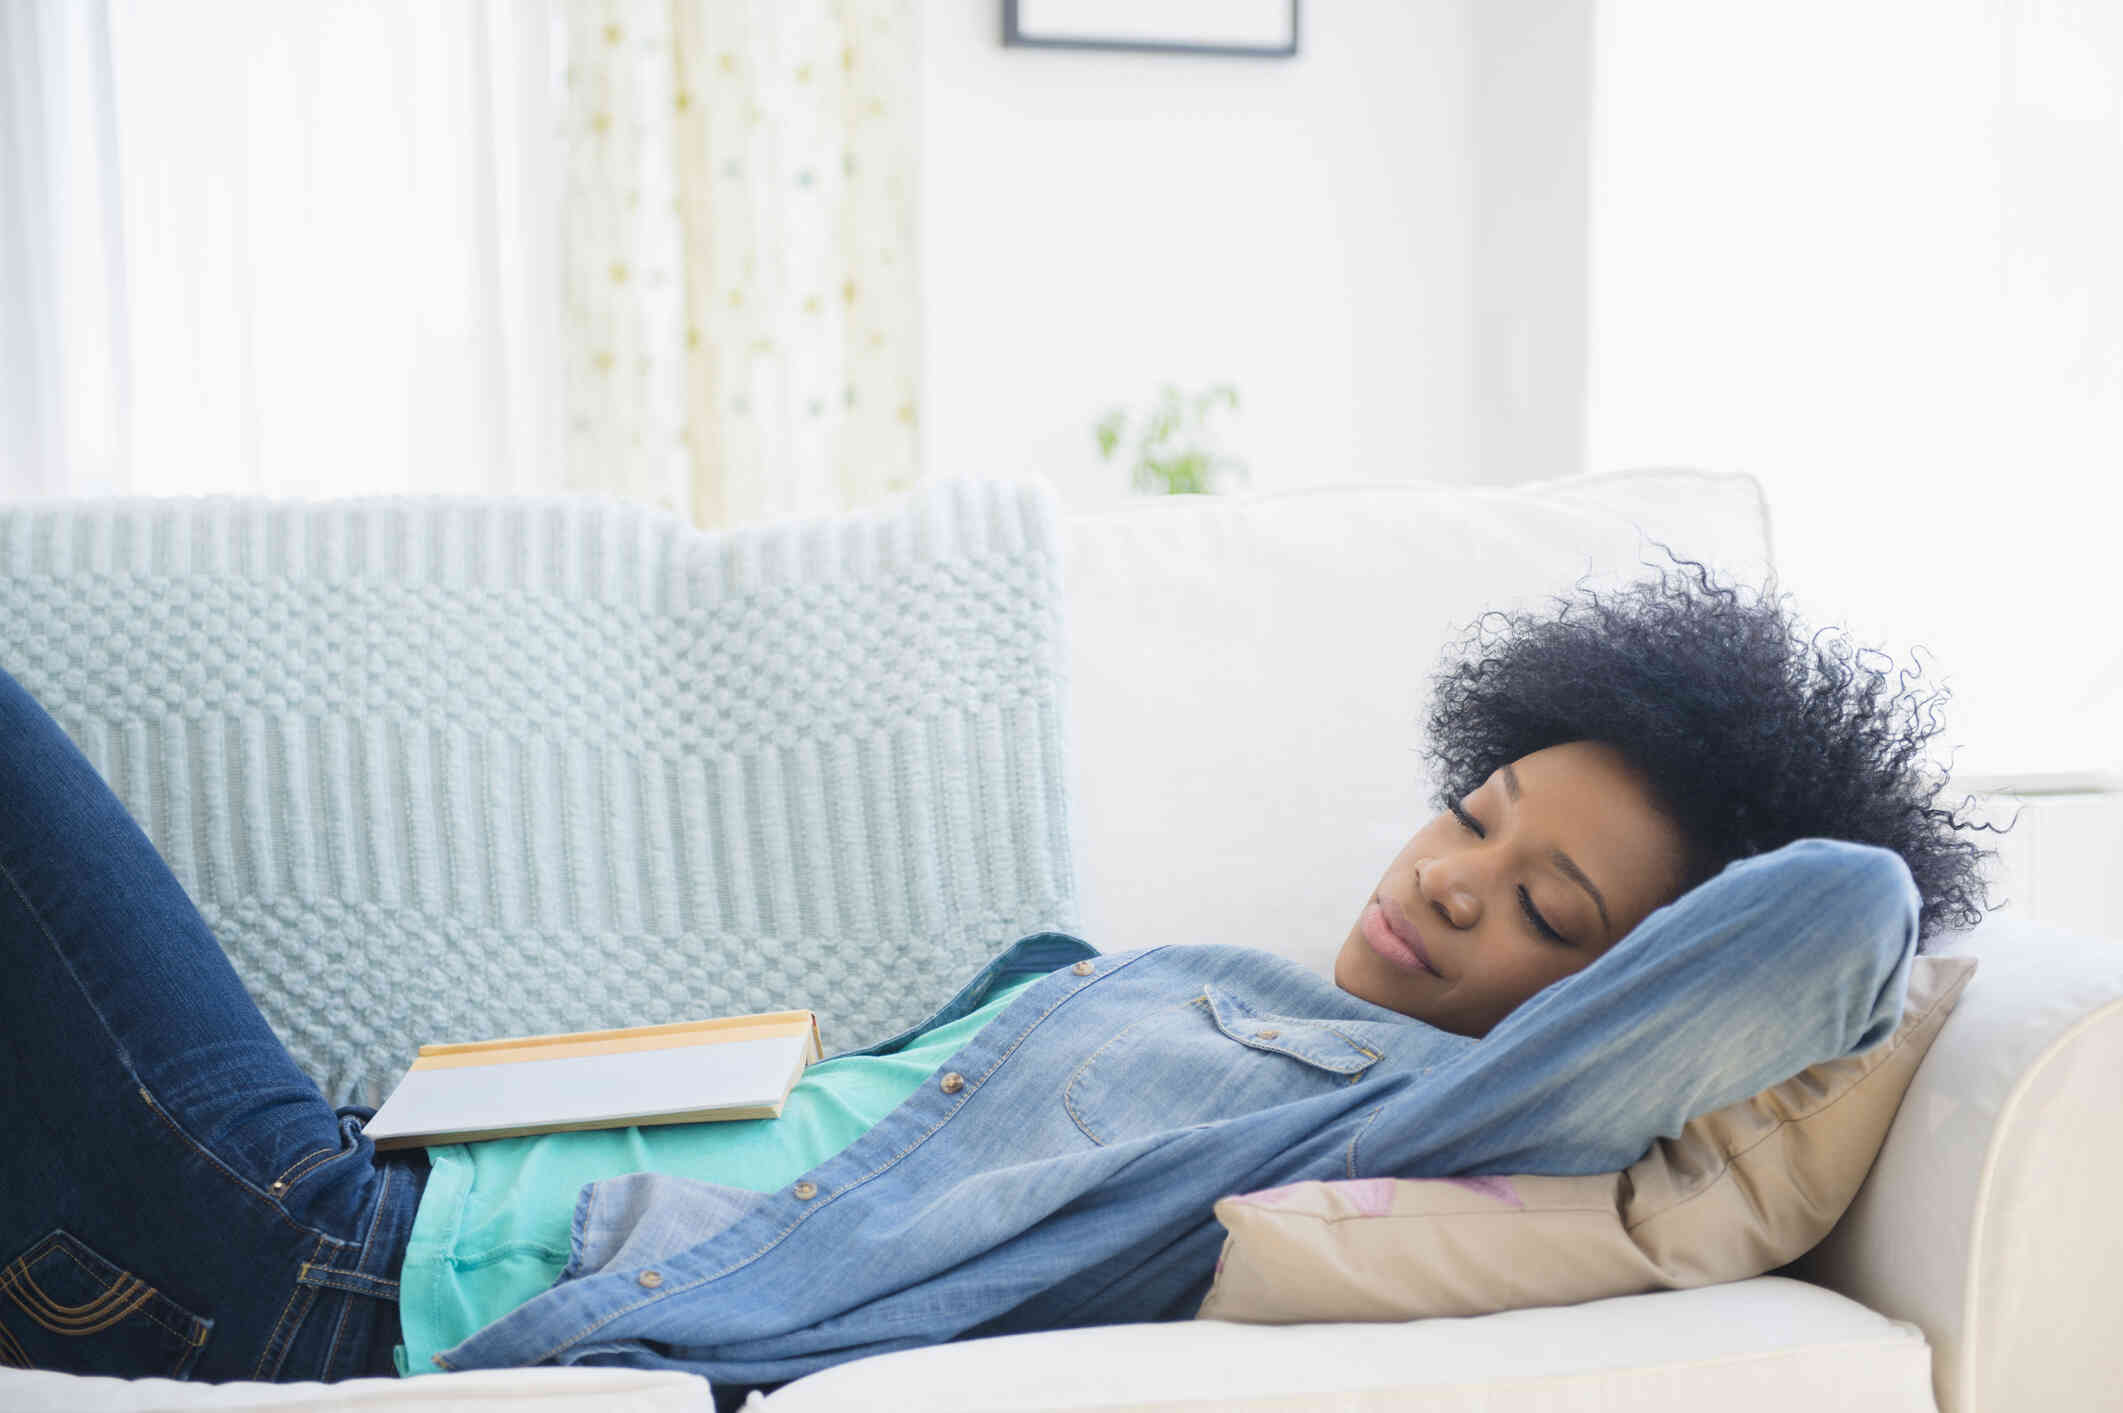 A woman ina blue jean jacket lays asleep on her couch during the day with an open book resting on her stomach.